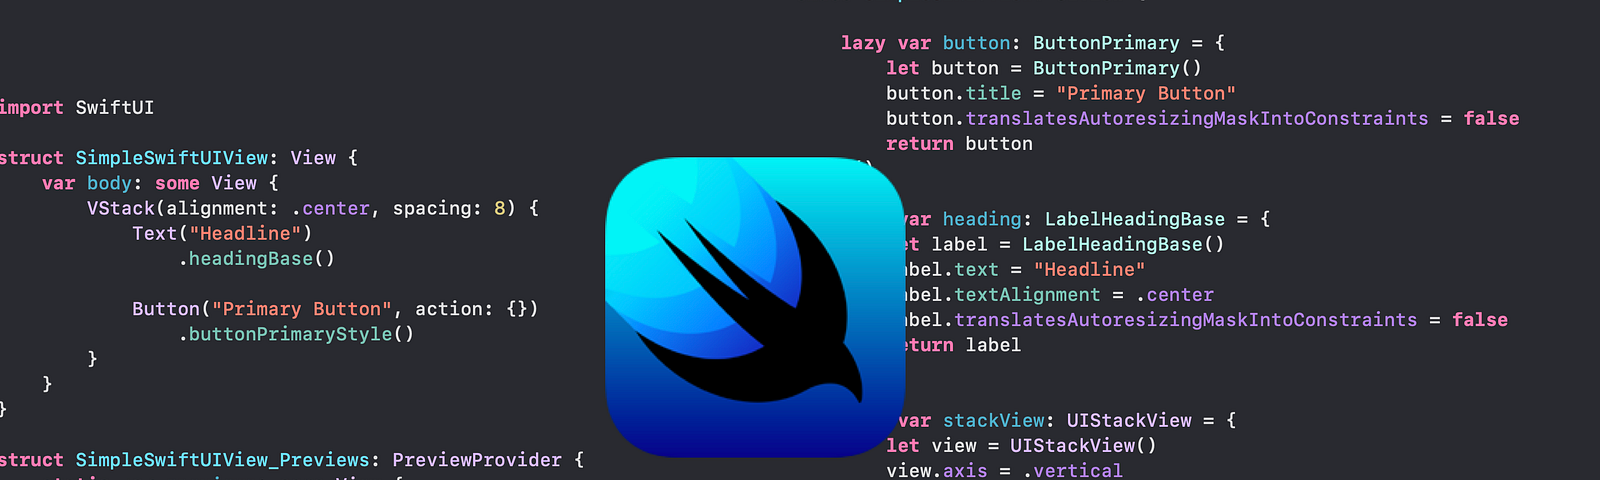 Screenshot of SwiftUI code and UIKit code side-by-side implementing the same UI